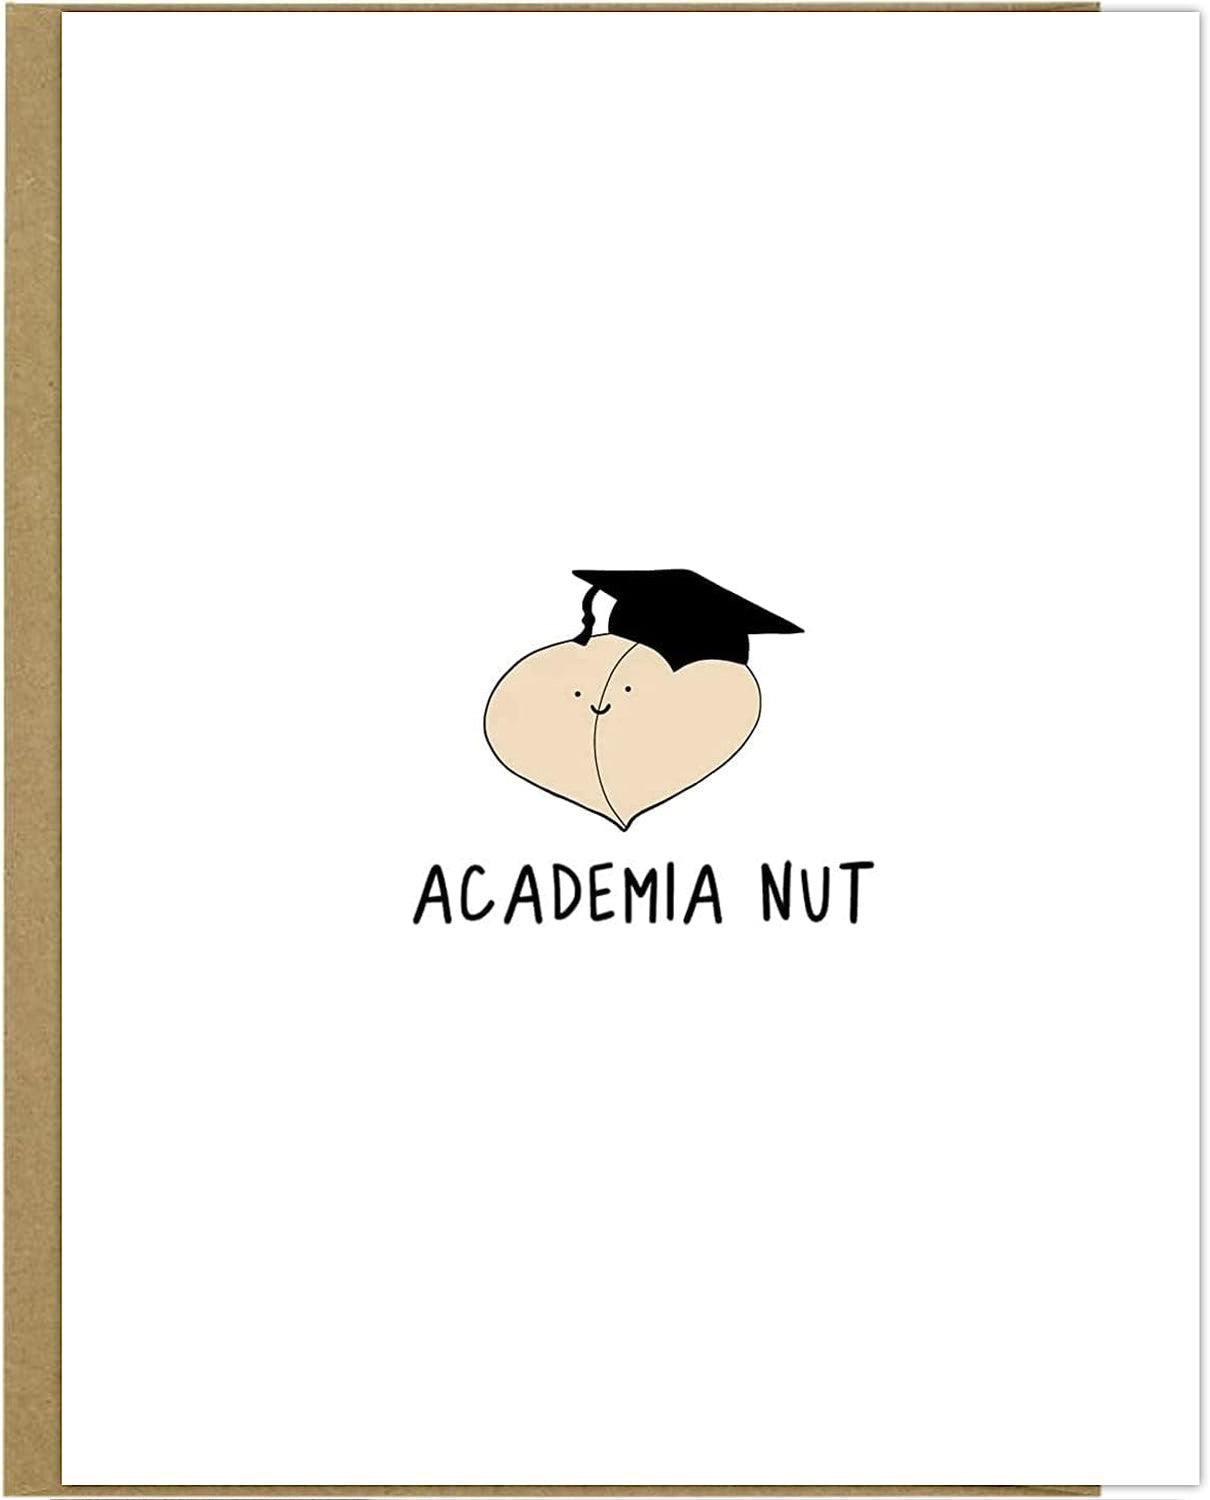 A natural envelope containing a card with the words "rockdoodles Academia Nut Card" on it.